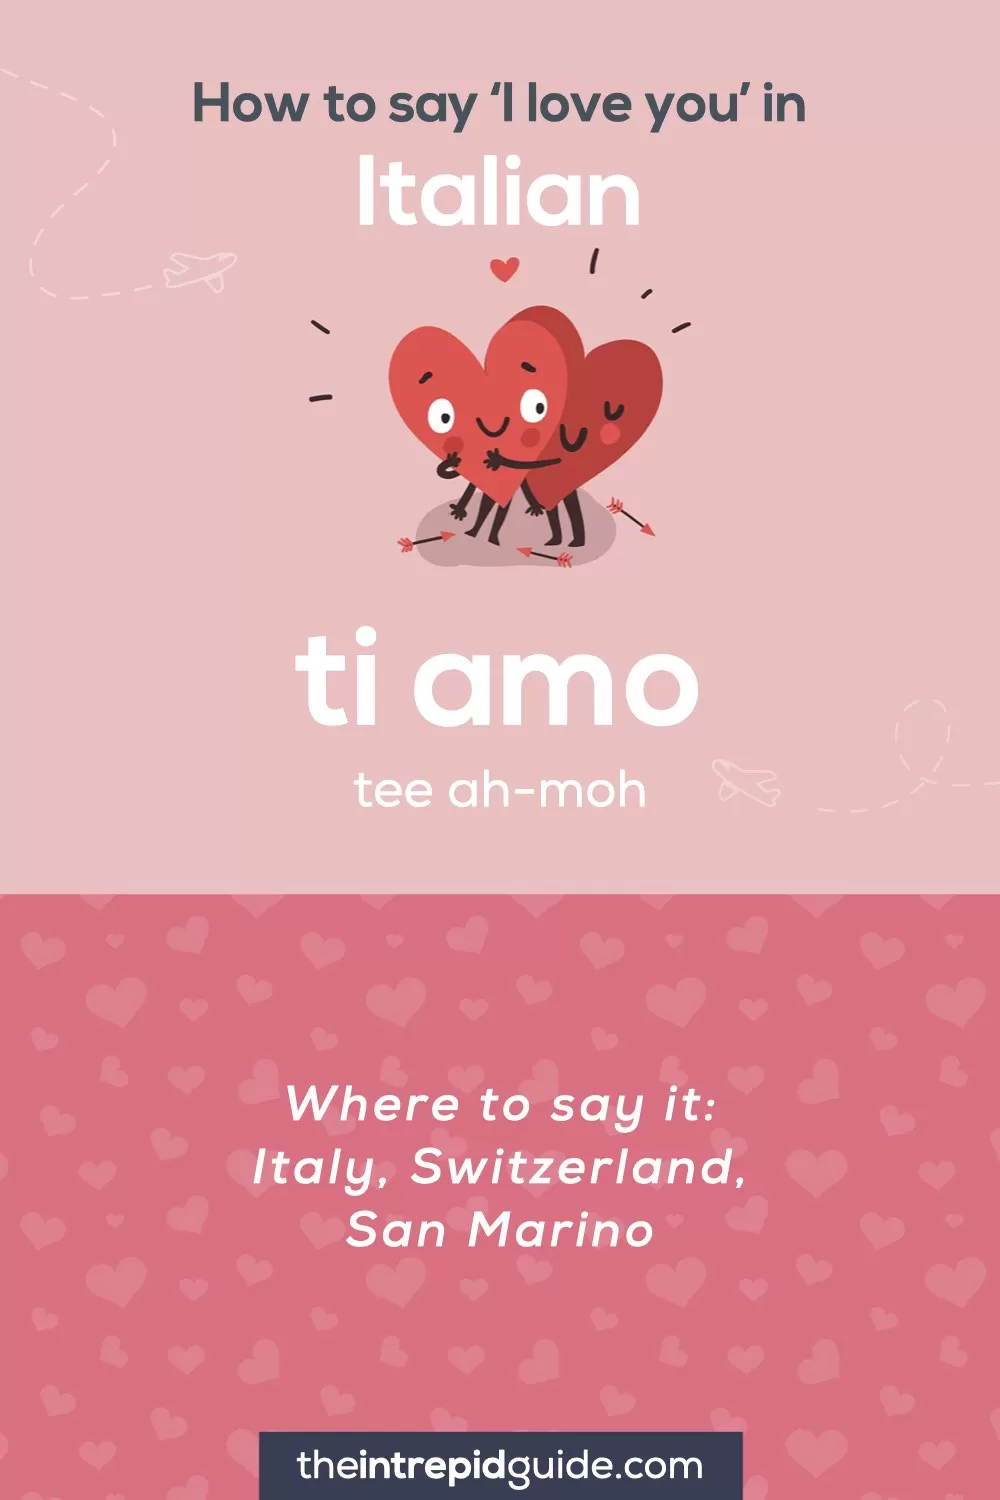 How to say I love you in different languages - Italian - ti amo